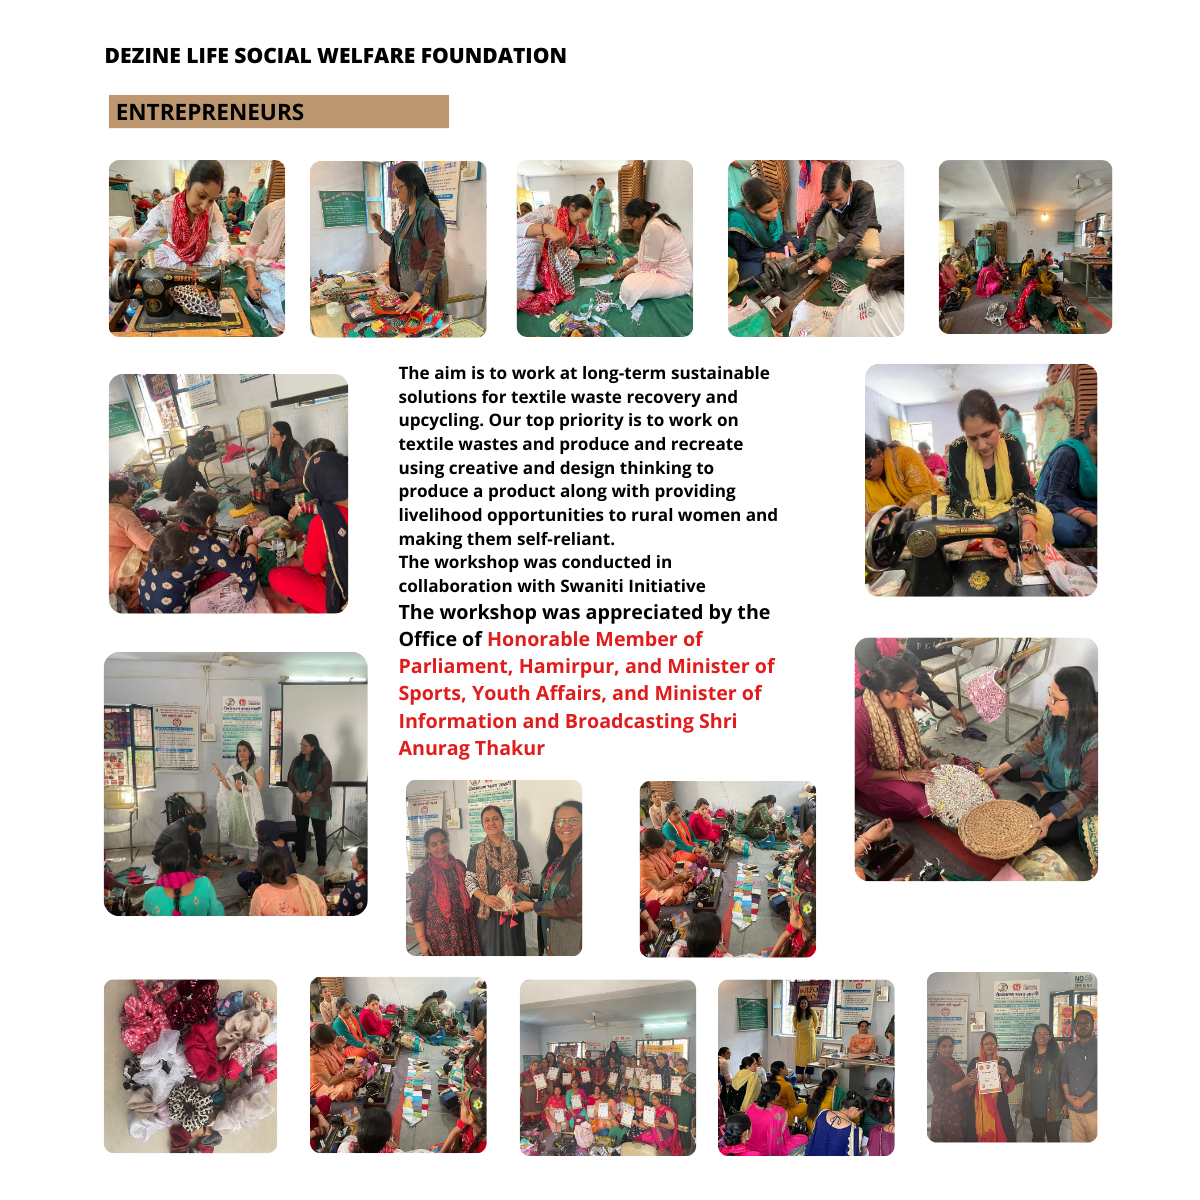 "Himachal Swanity: Bunkojunko's Upcycling Initiative in Collaboration for Women's Empowerment"